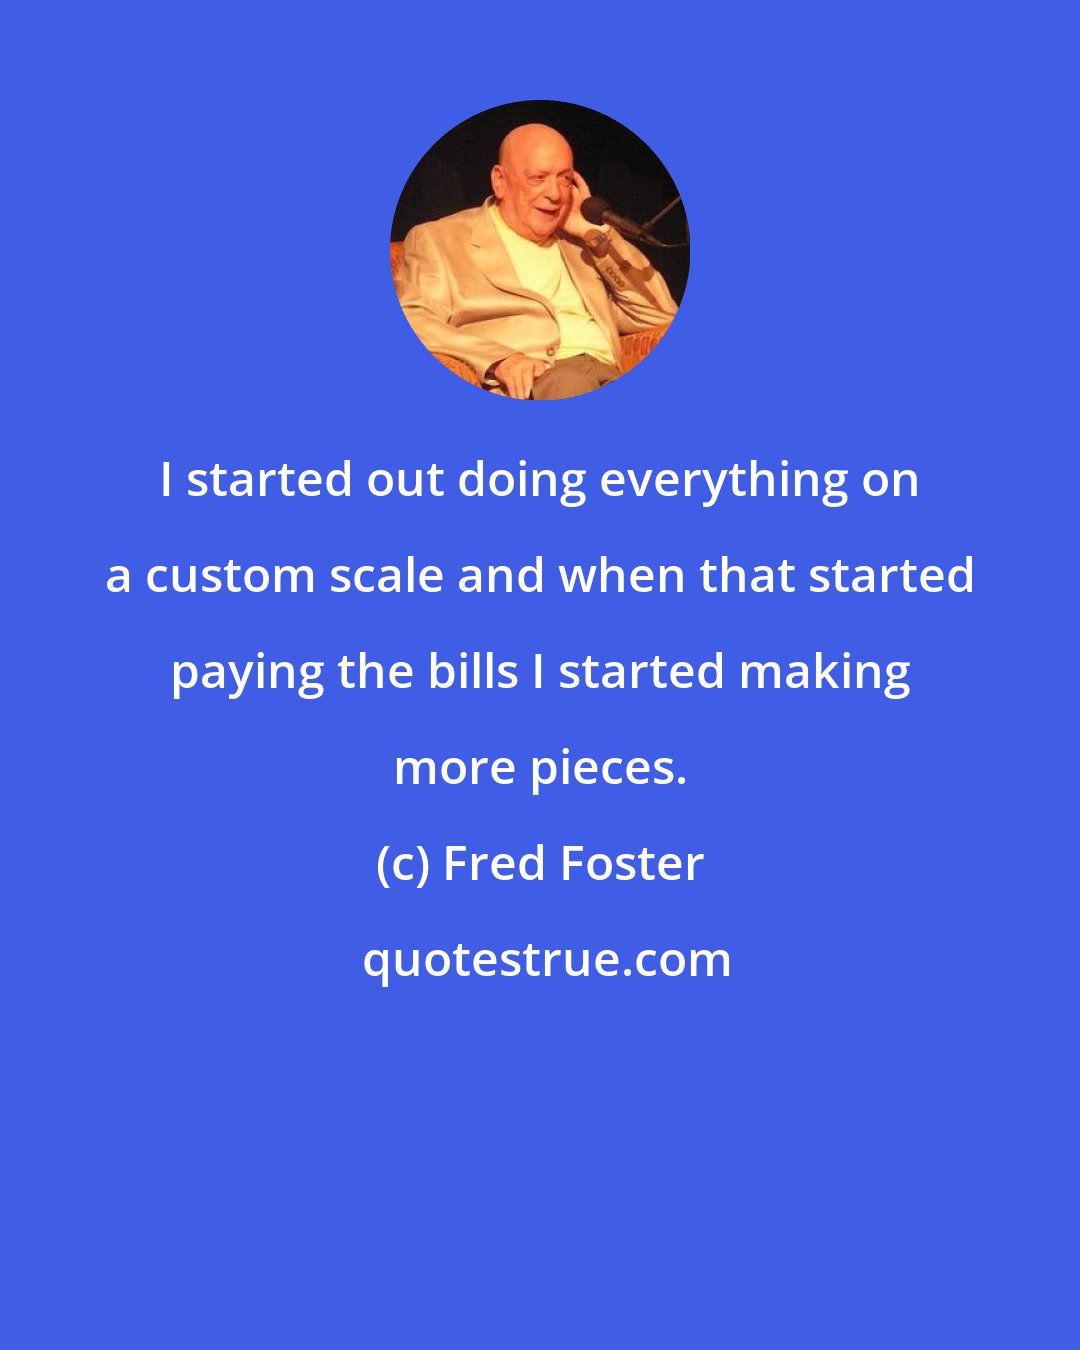 Fred Foster: I started out doing everything on a custom scale and when that started paying the bills I started making more pieces.